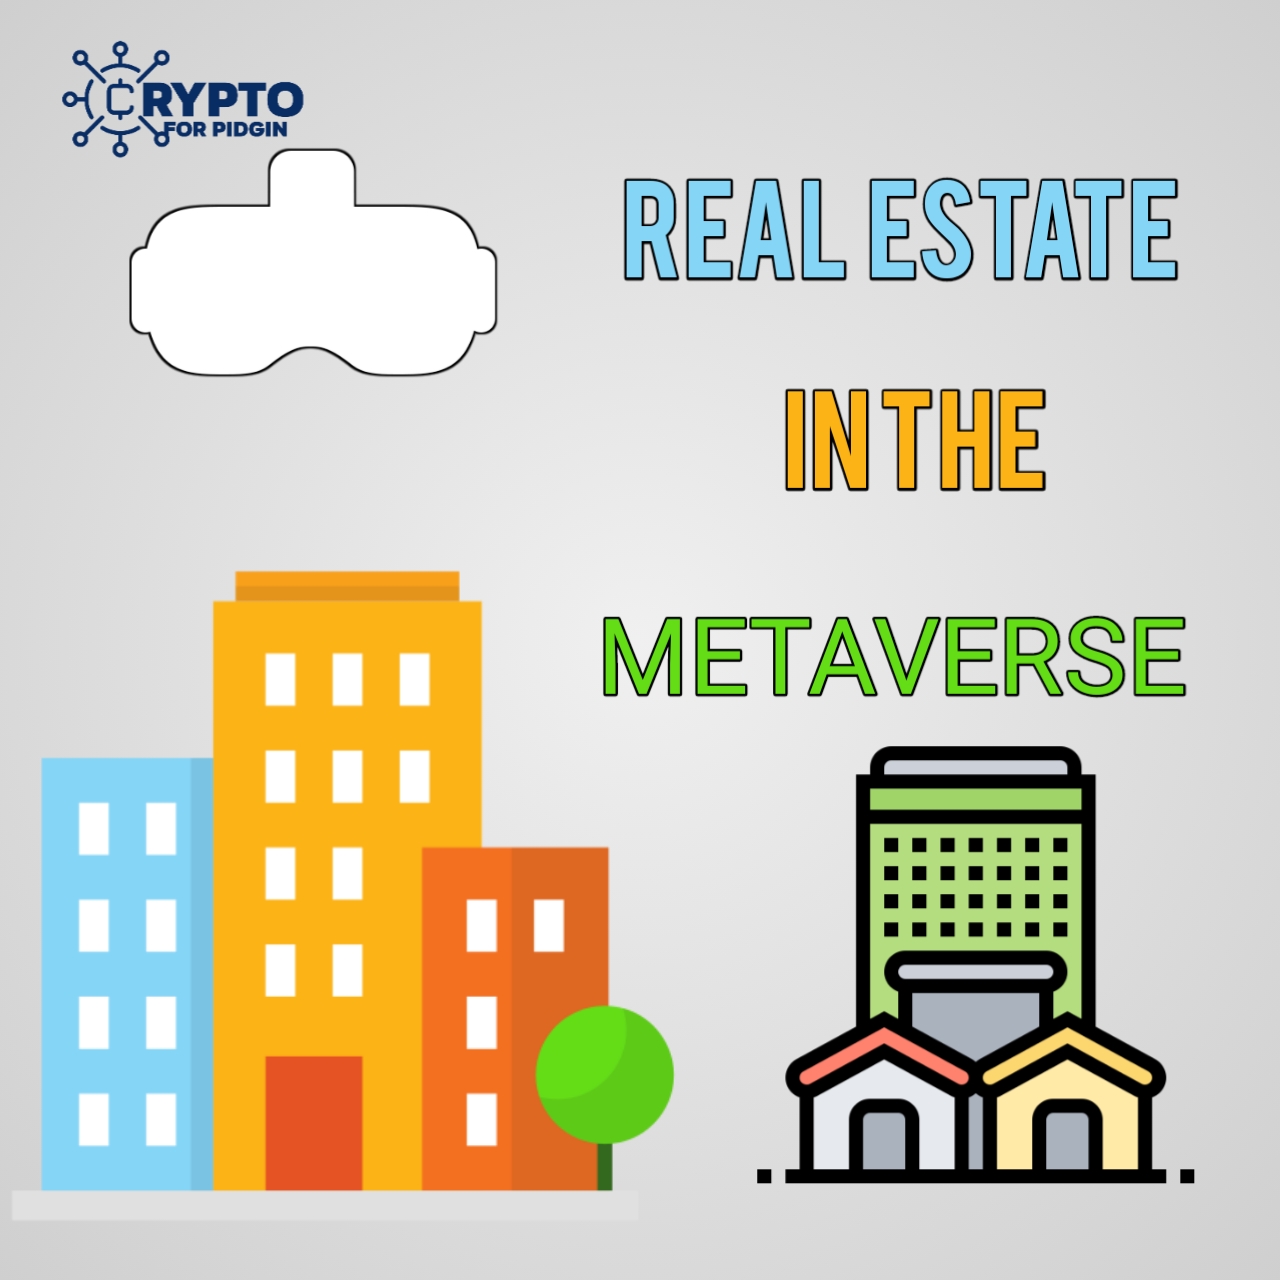 Real estate in the metaverse